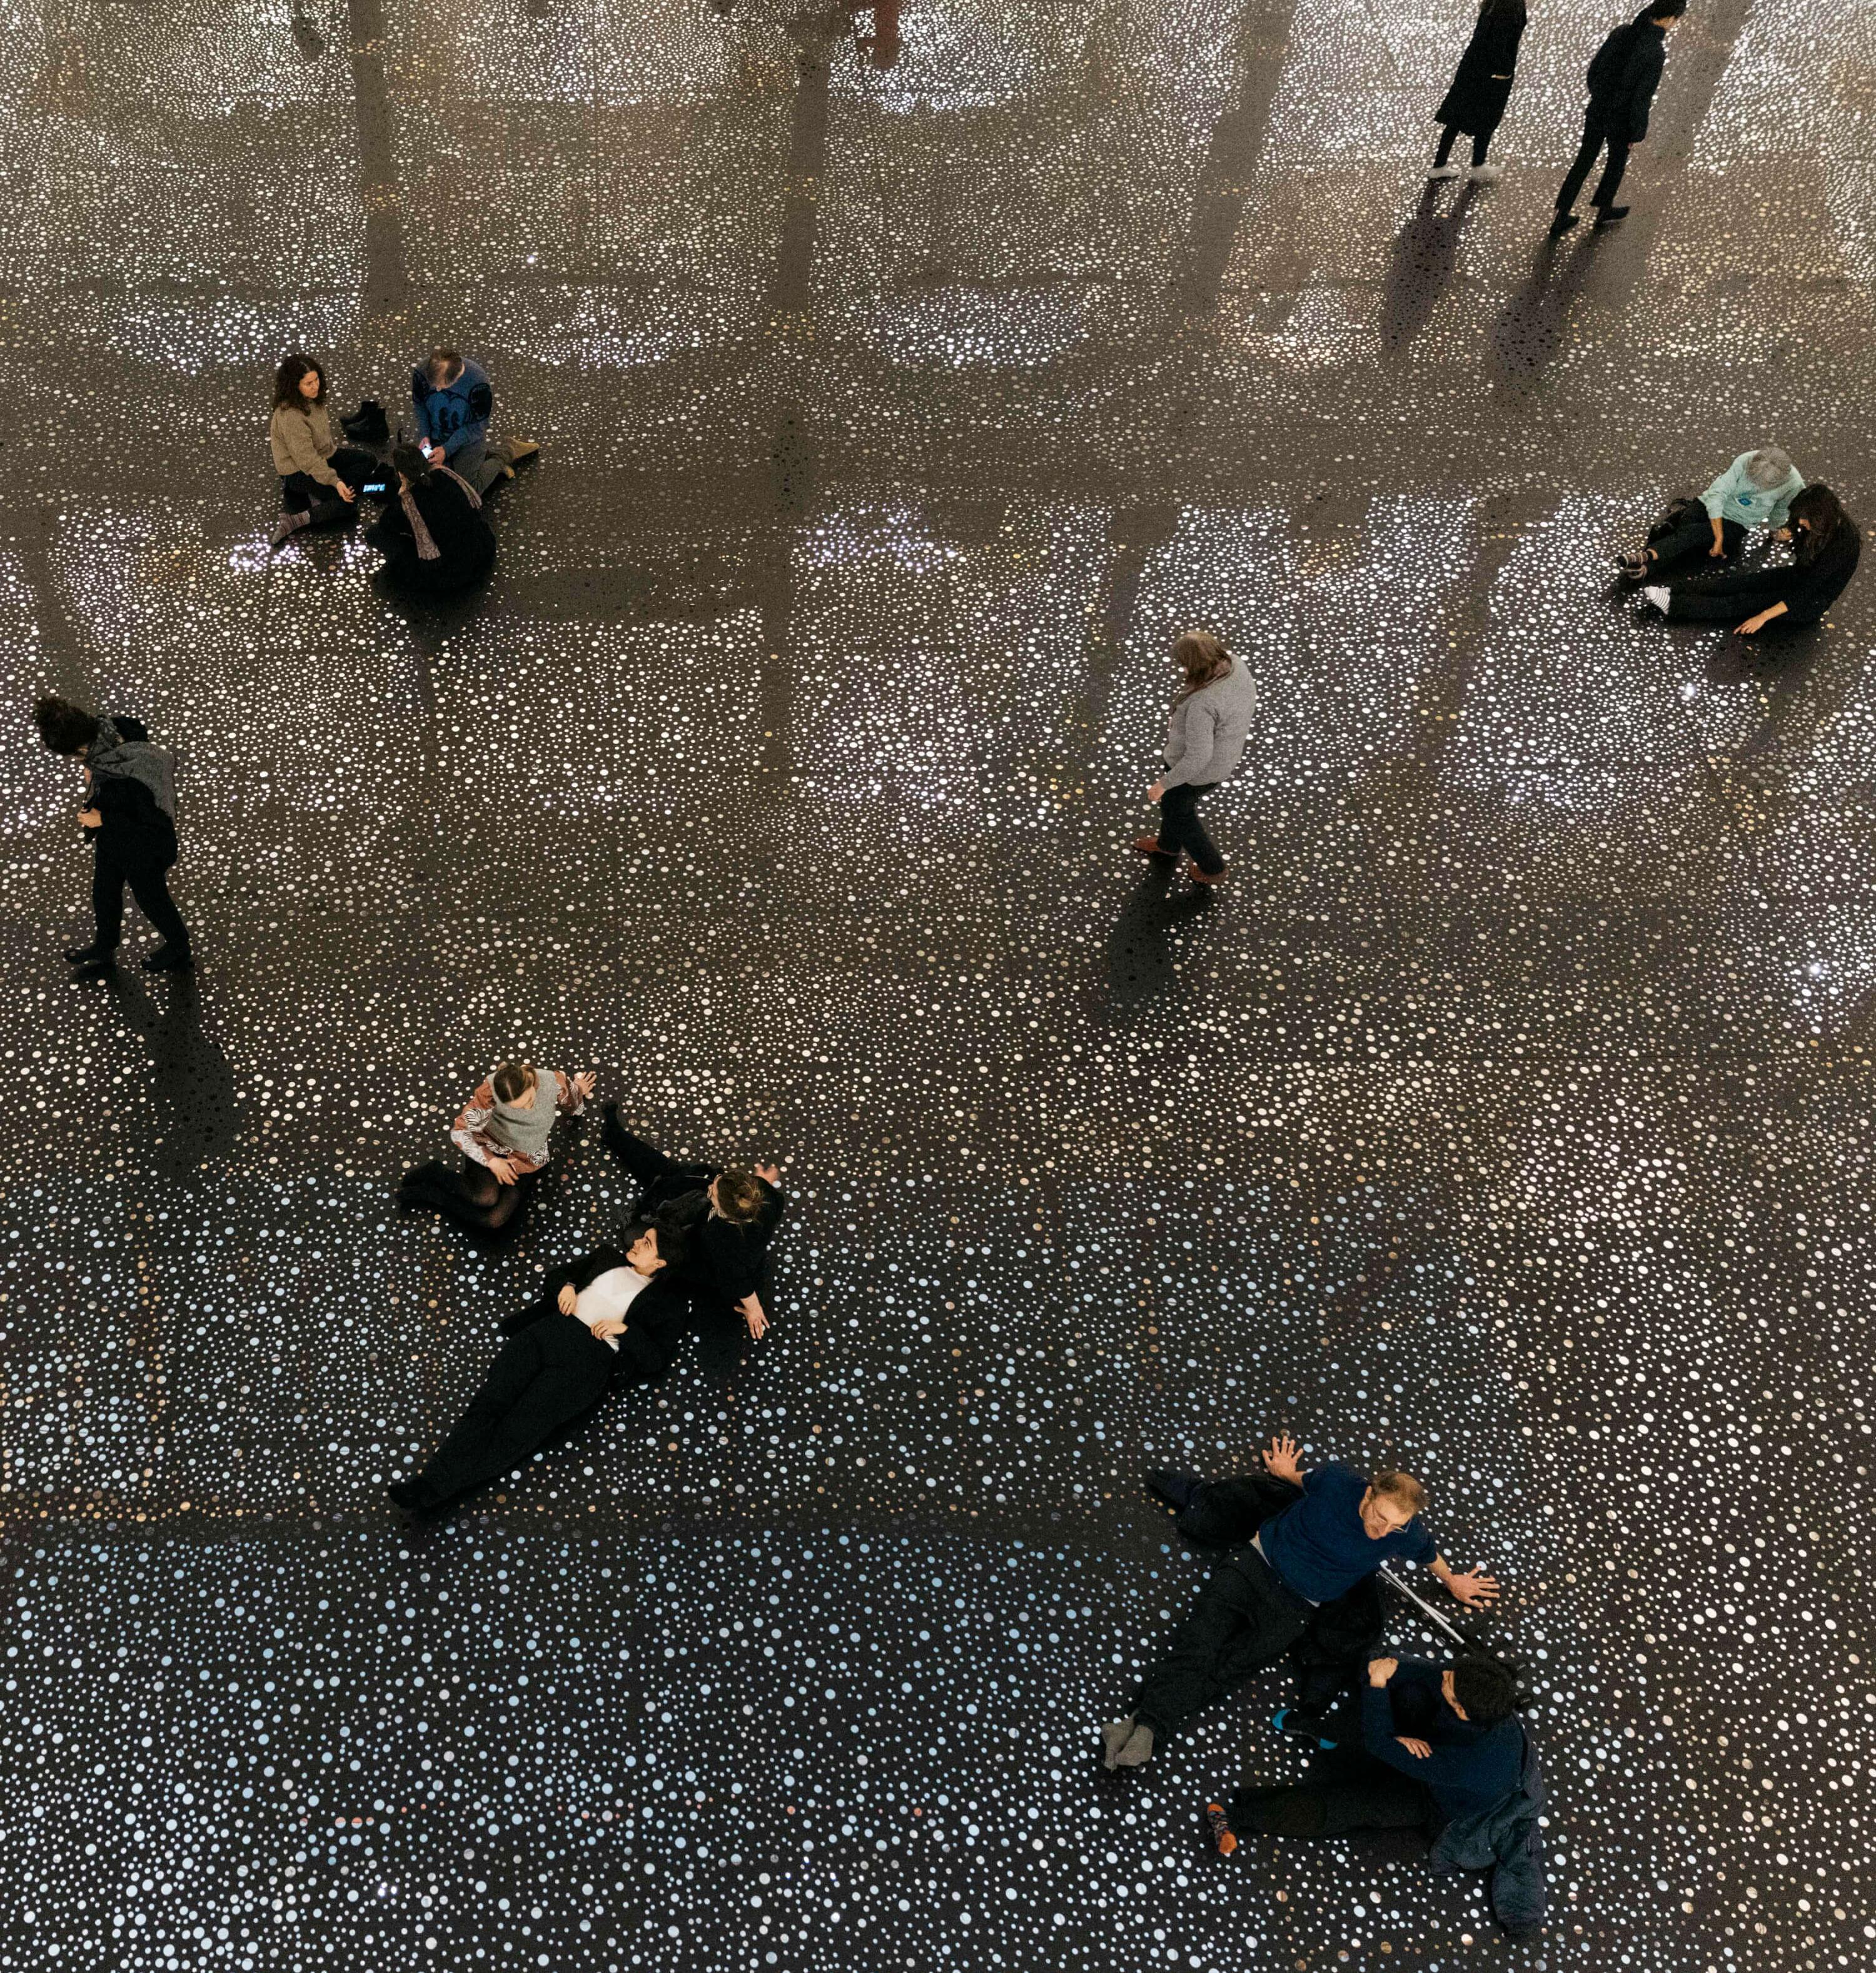 The atrium of the Gropius Bau. The floor is covered with a reflective foil as part of the exhibition "RAINBOW SERPENT (VERSION)" by Daniel Boyd. Visitors sit and lie on the installation.